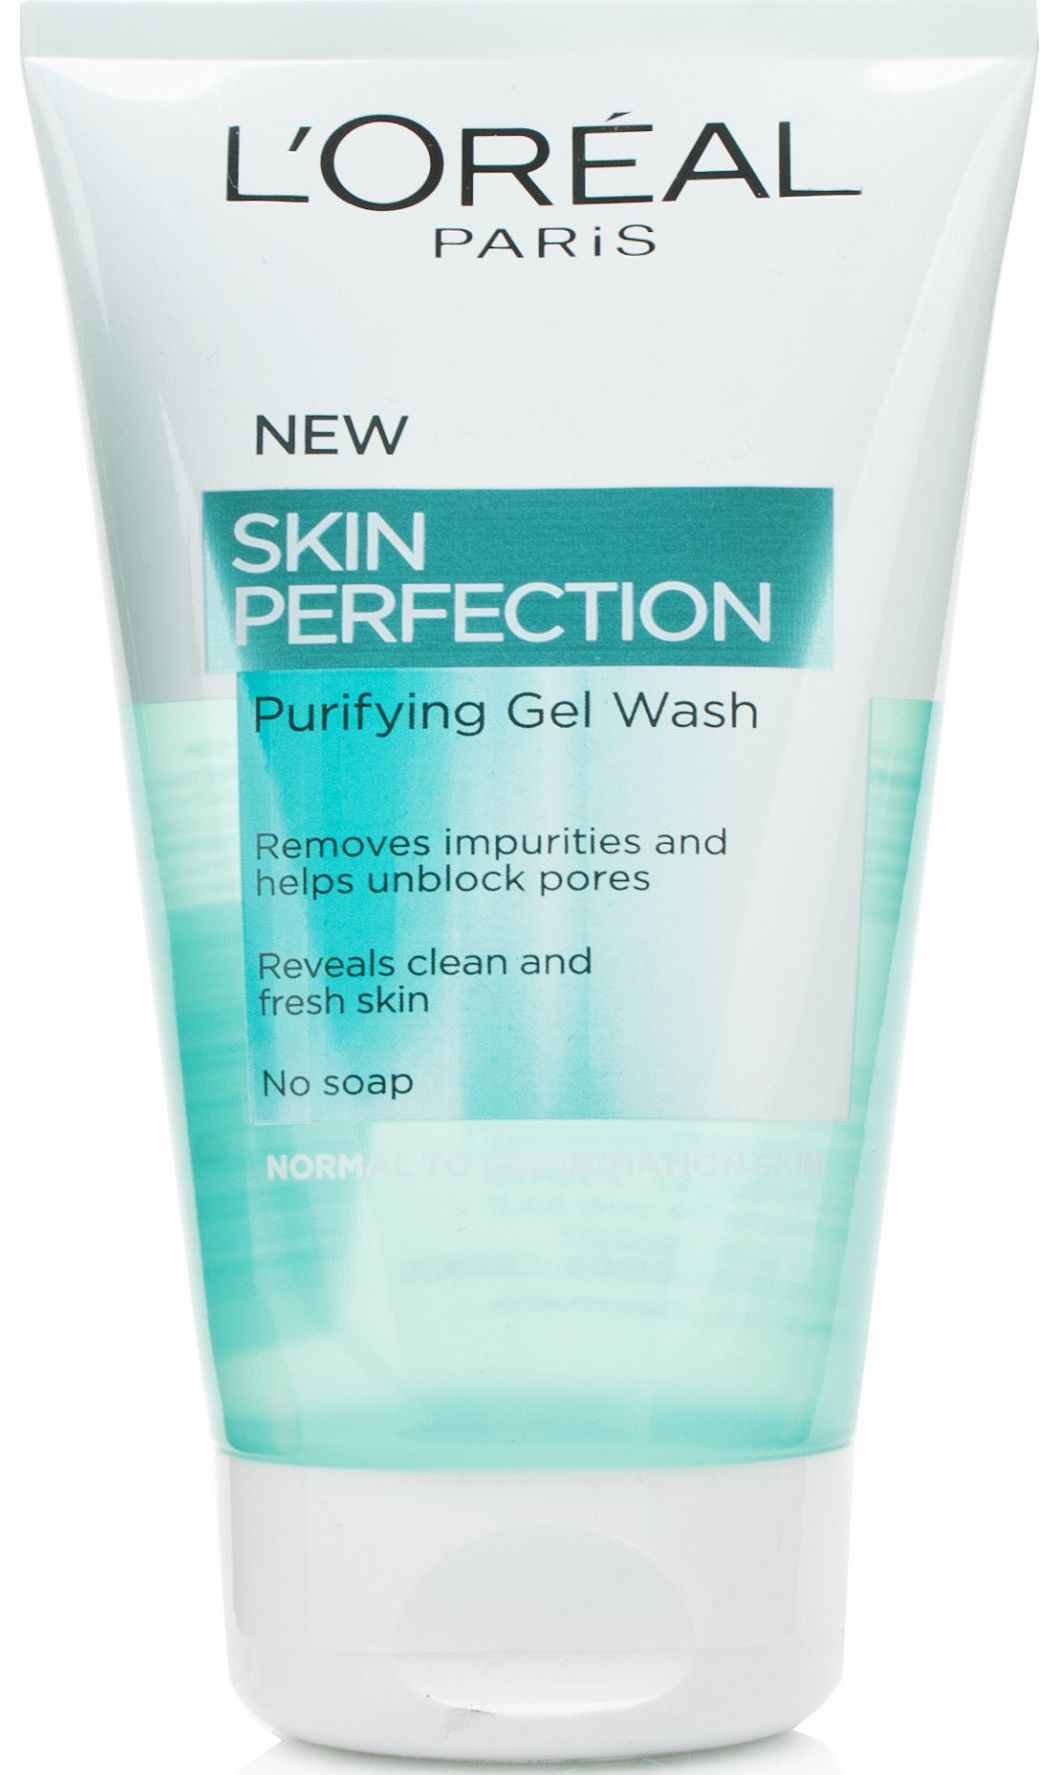 L'Oreal Skin Perfection Purifying Gel Wash